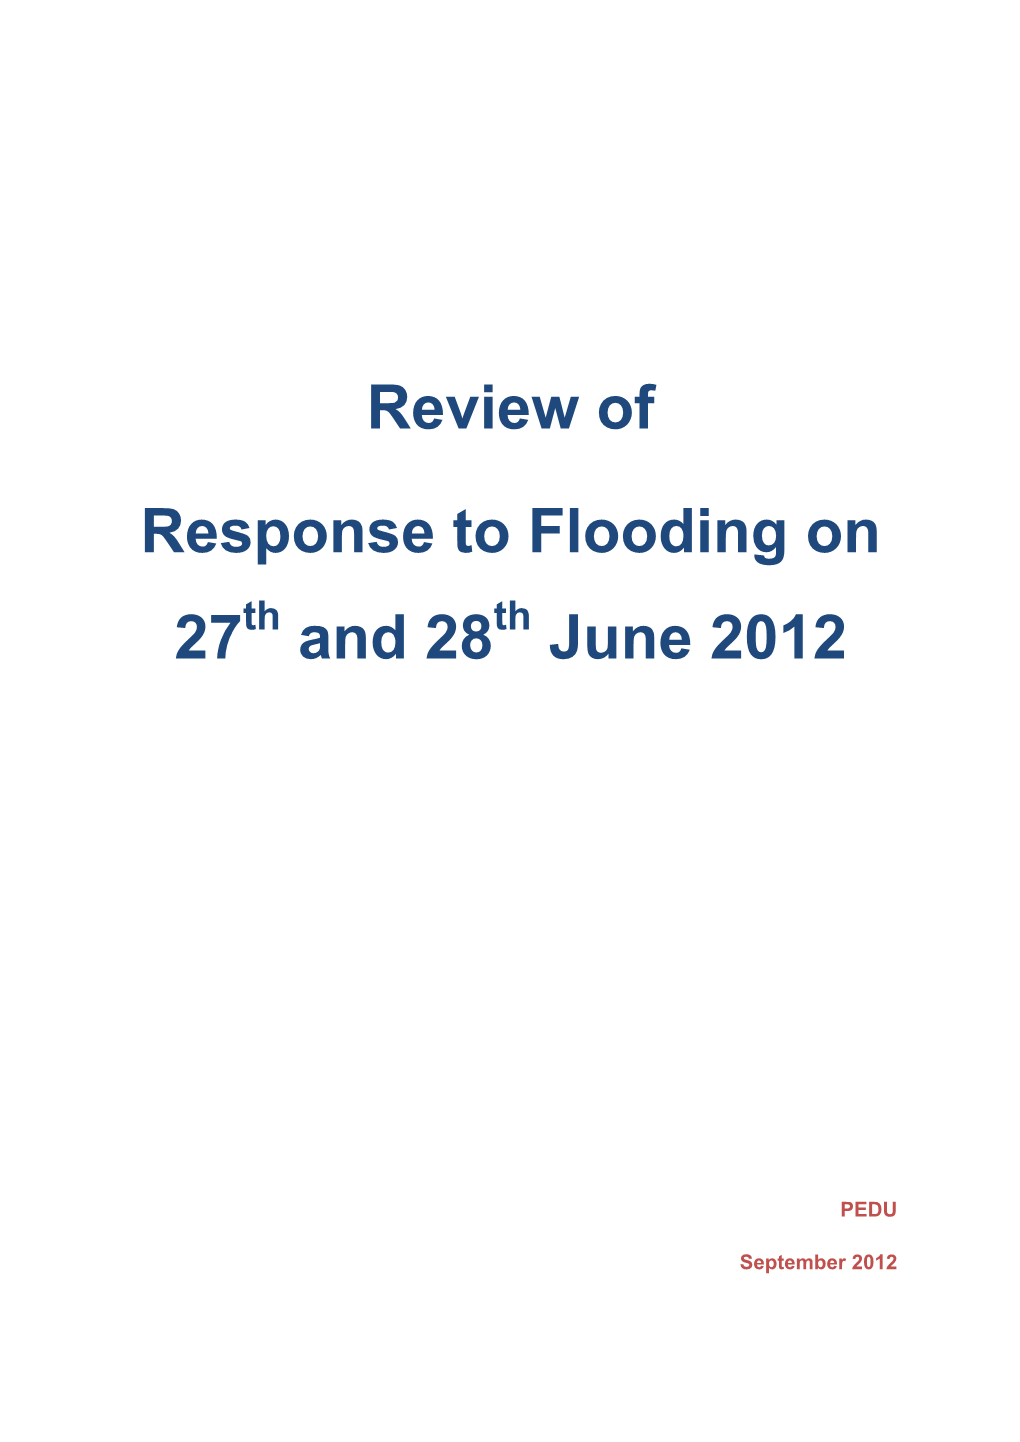 Review of Response to Flooding on 27 and 28 June 2012